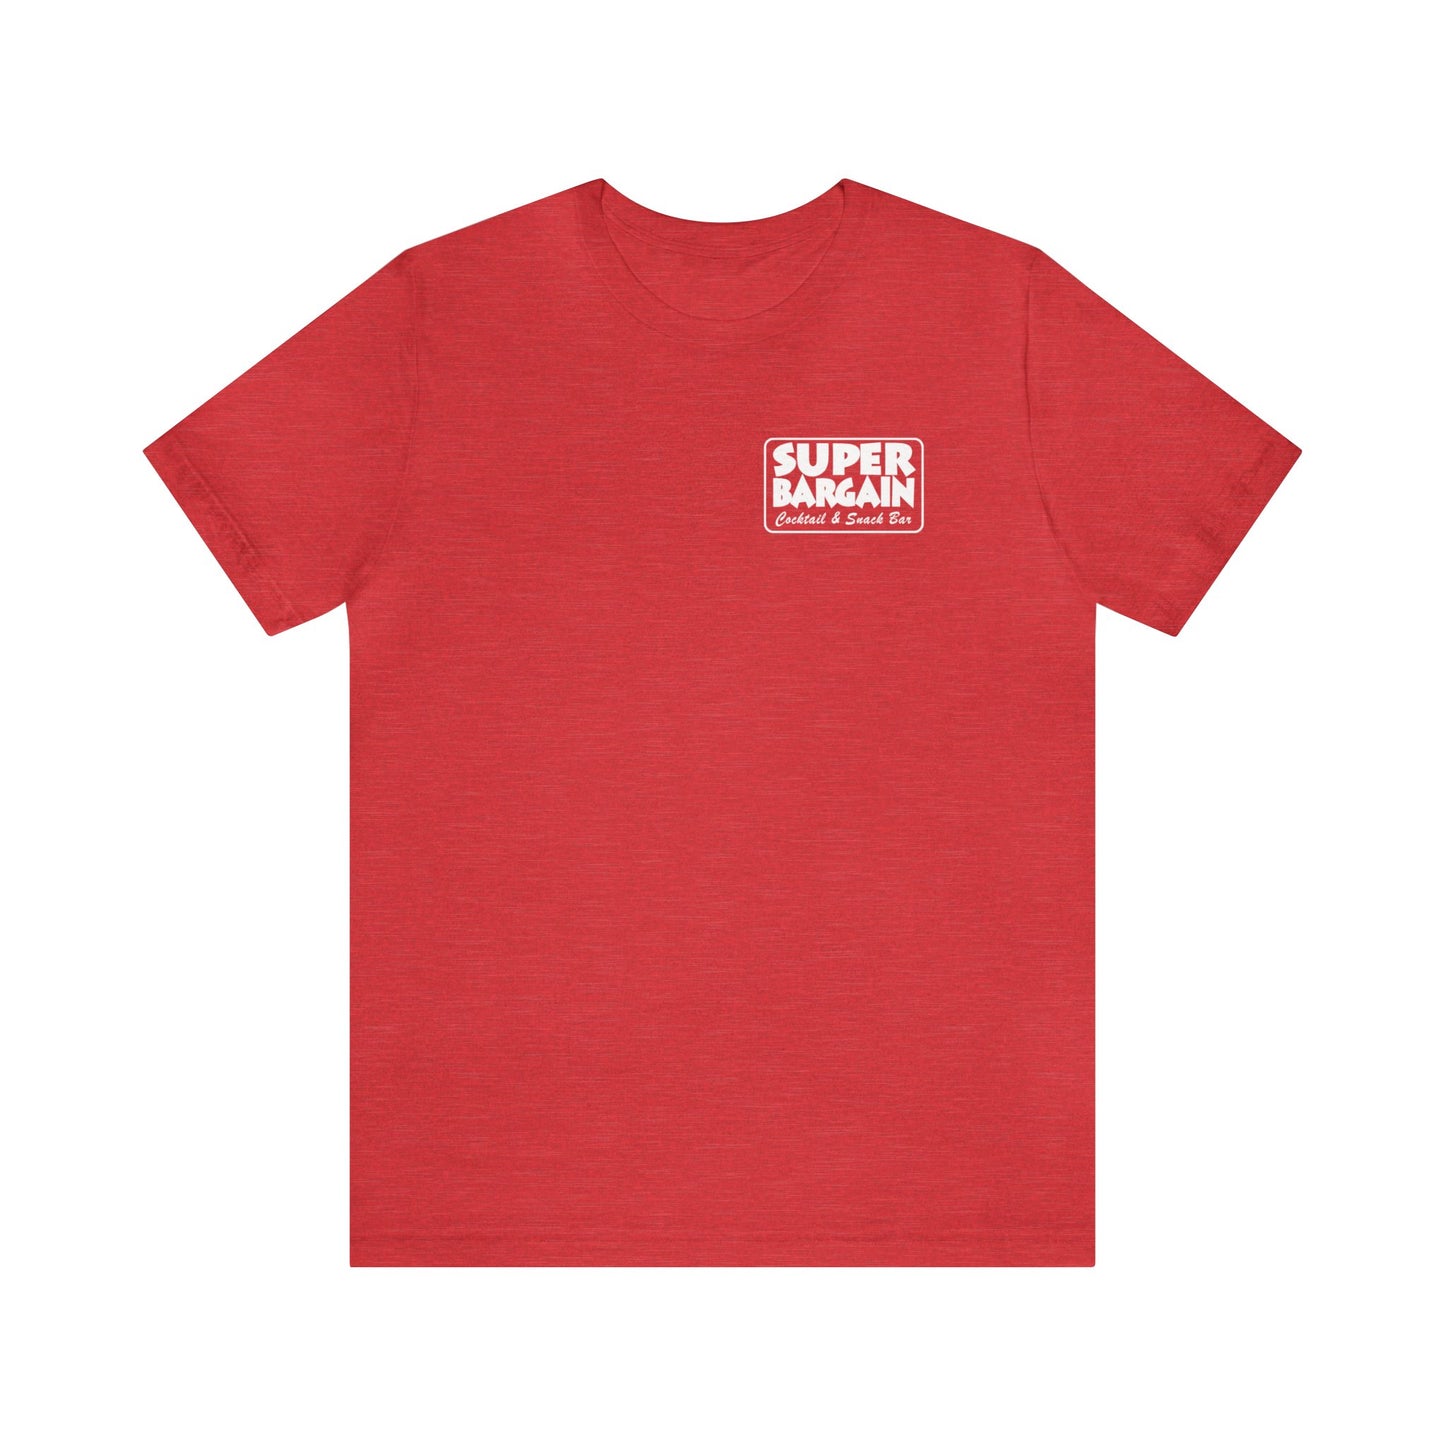 Unisex Jersey Short Sleeve Monochrome Logo Tee by Printify with a small logo in the upper left area, featuring the text "SUPER & BEAR - Cabbagetown Grocery" in white on a red background.